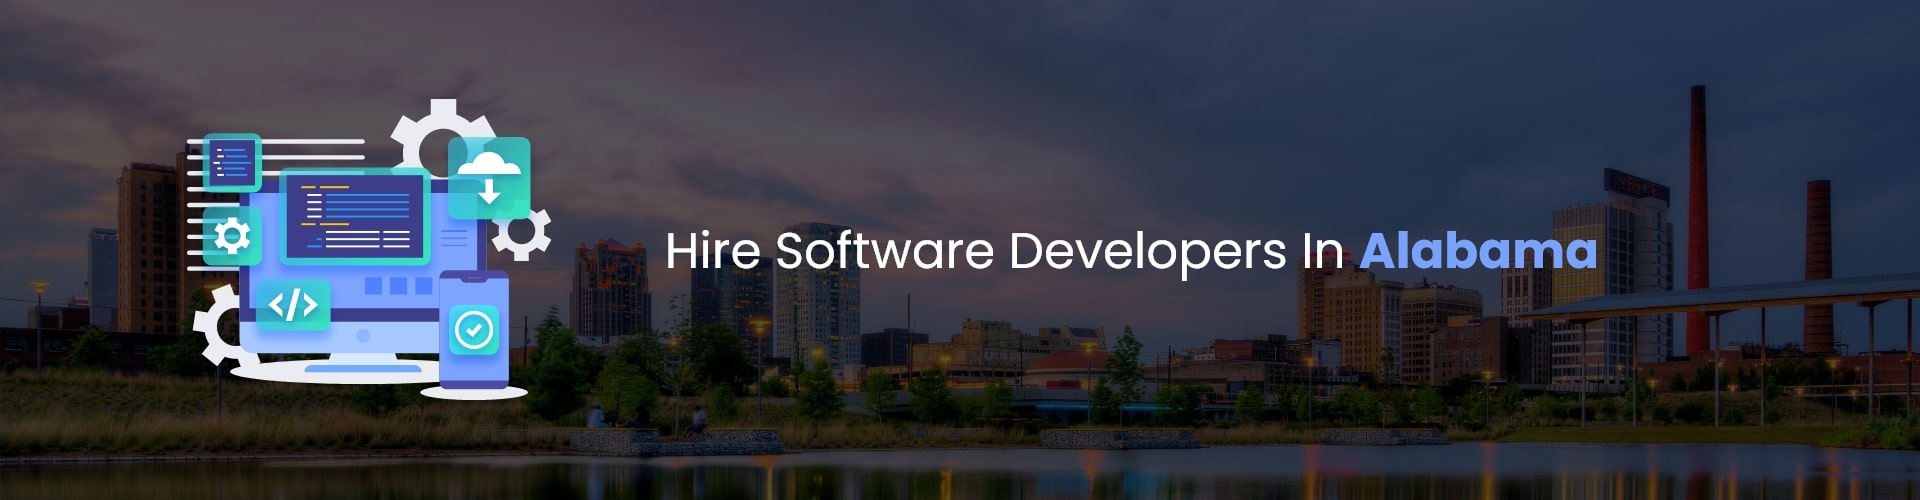 hire software developers in alabama